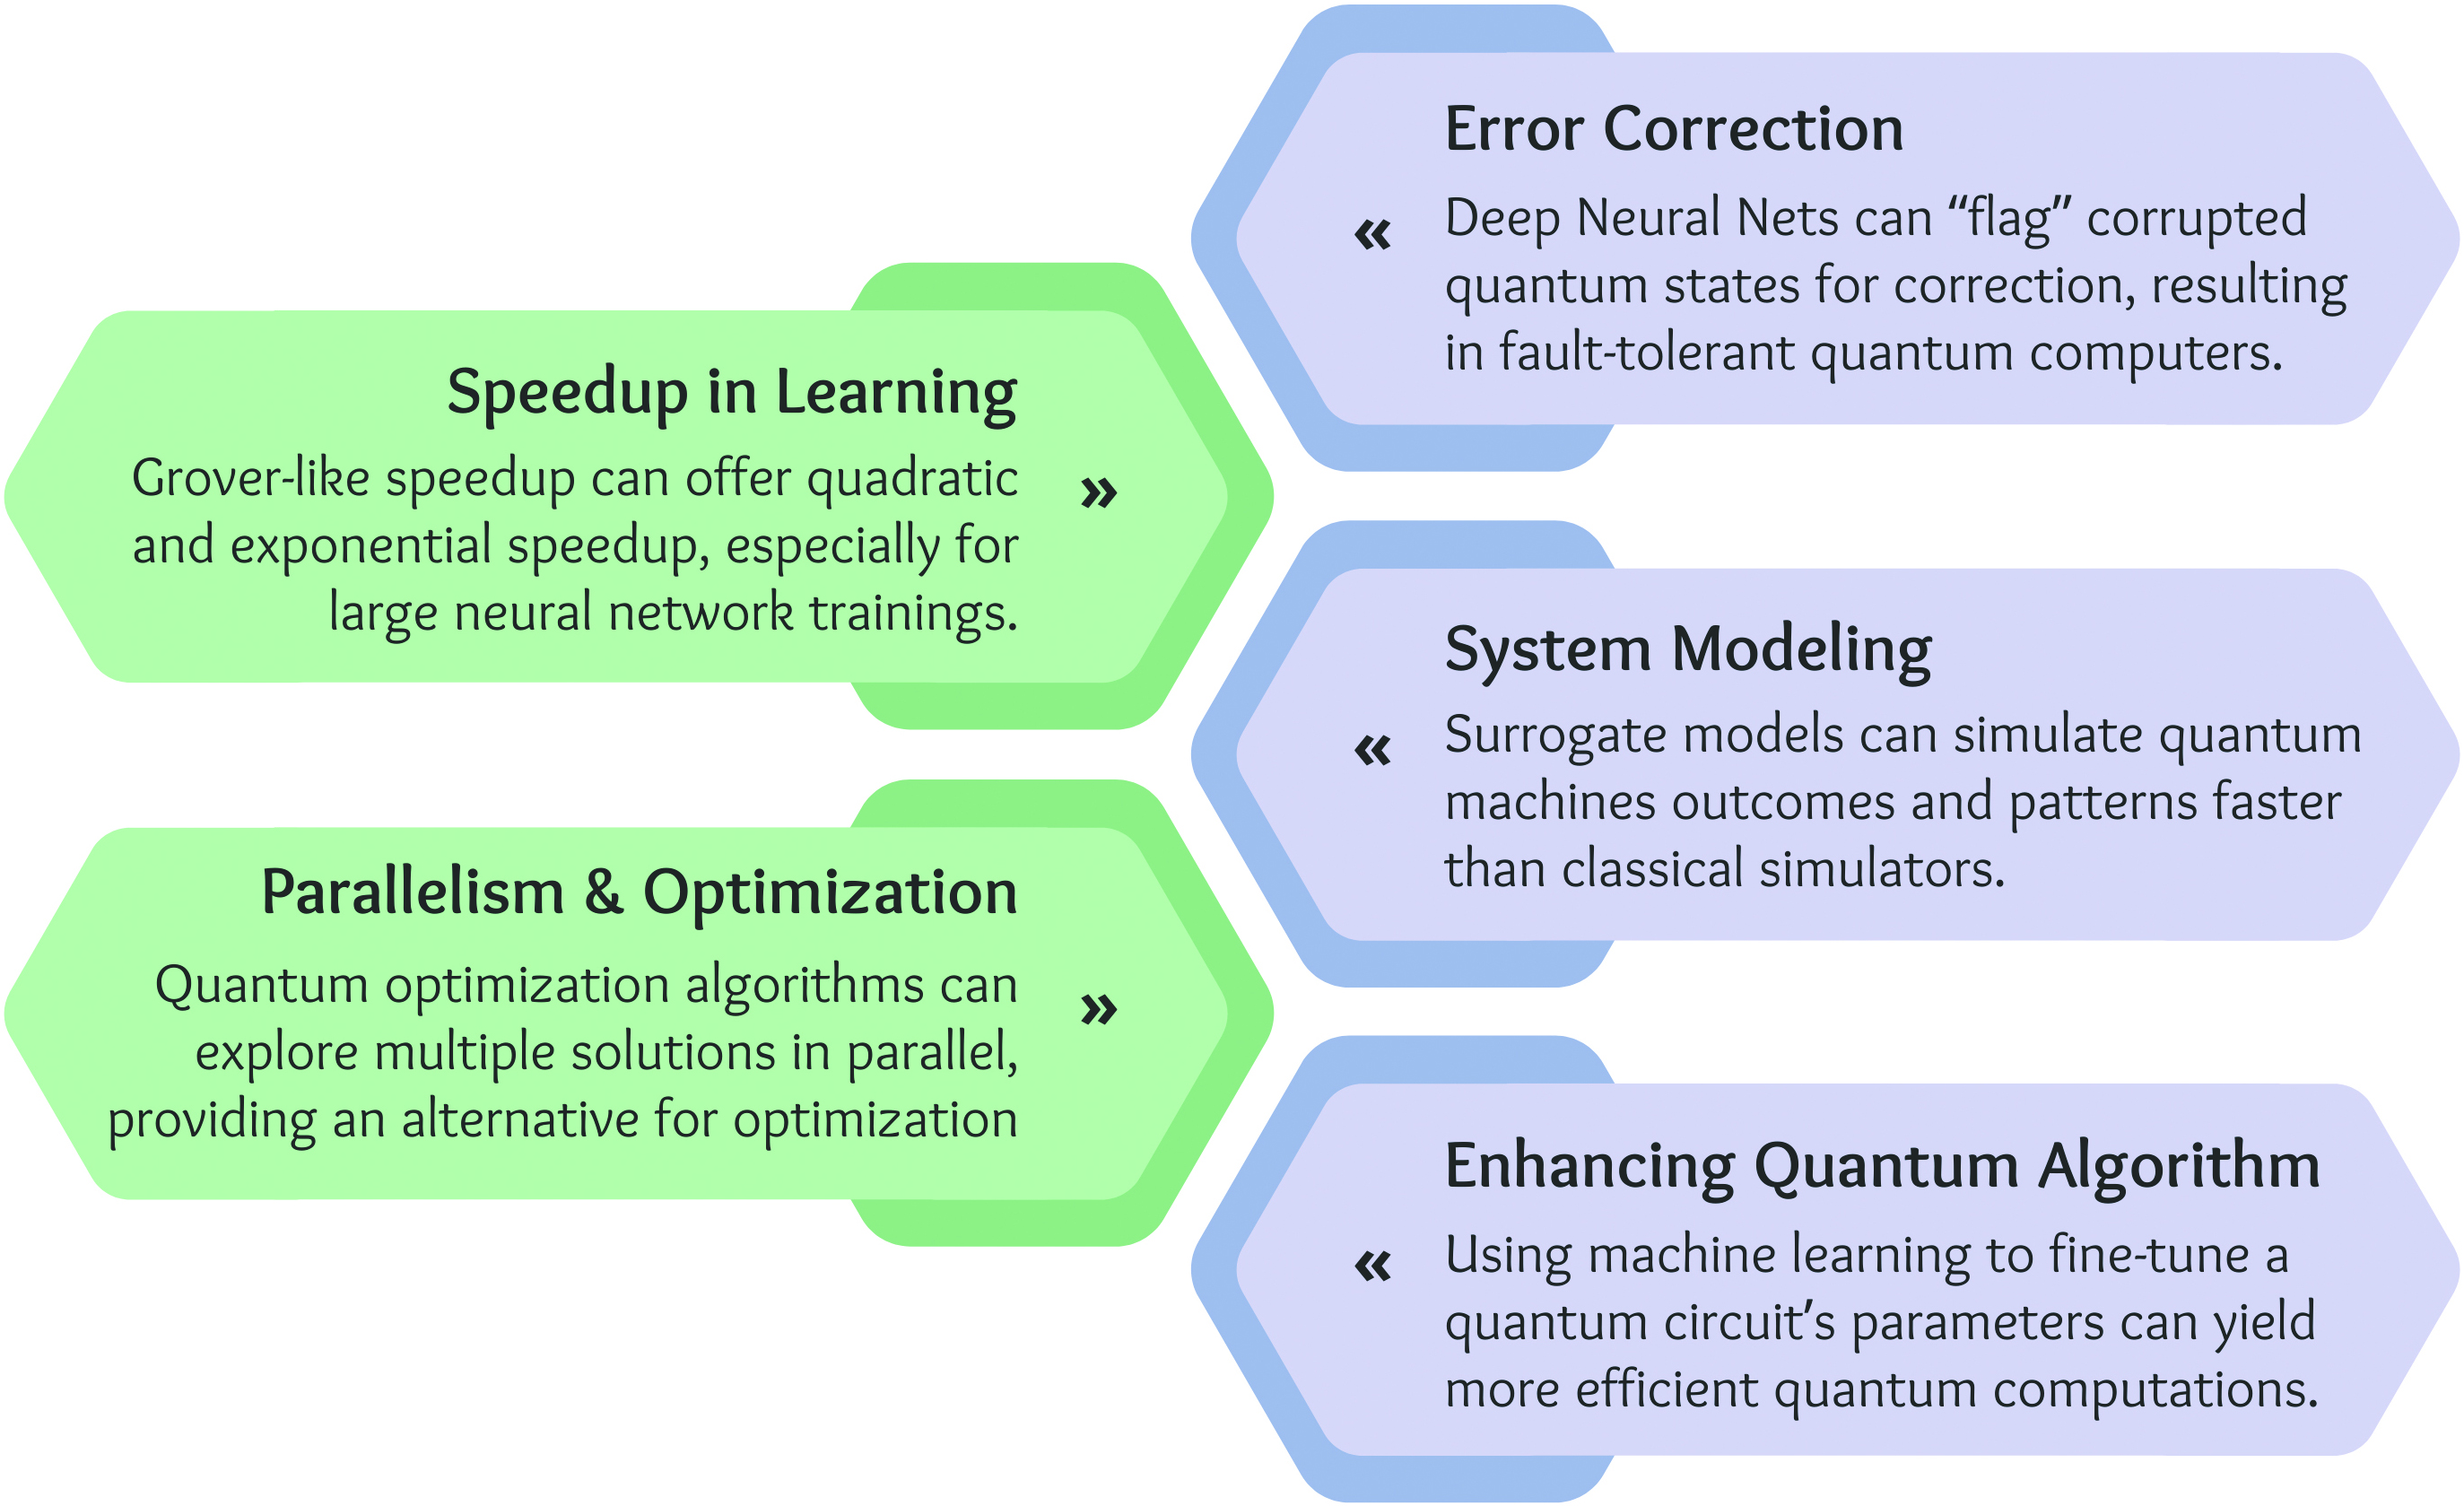 &lt;strong&gt;Figure 1.&lt;/strong&gt; The mutual benefits of quantum computing (in green) and machine learning (in purple) have resulted in a new concept called quantum machine learning, which will influence the future directions of fields like computational science, data analytics, and predictive modeling. Figure courtesy of the authors.